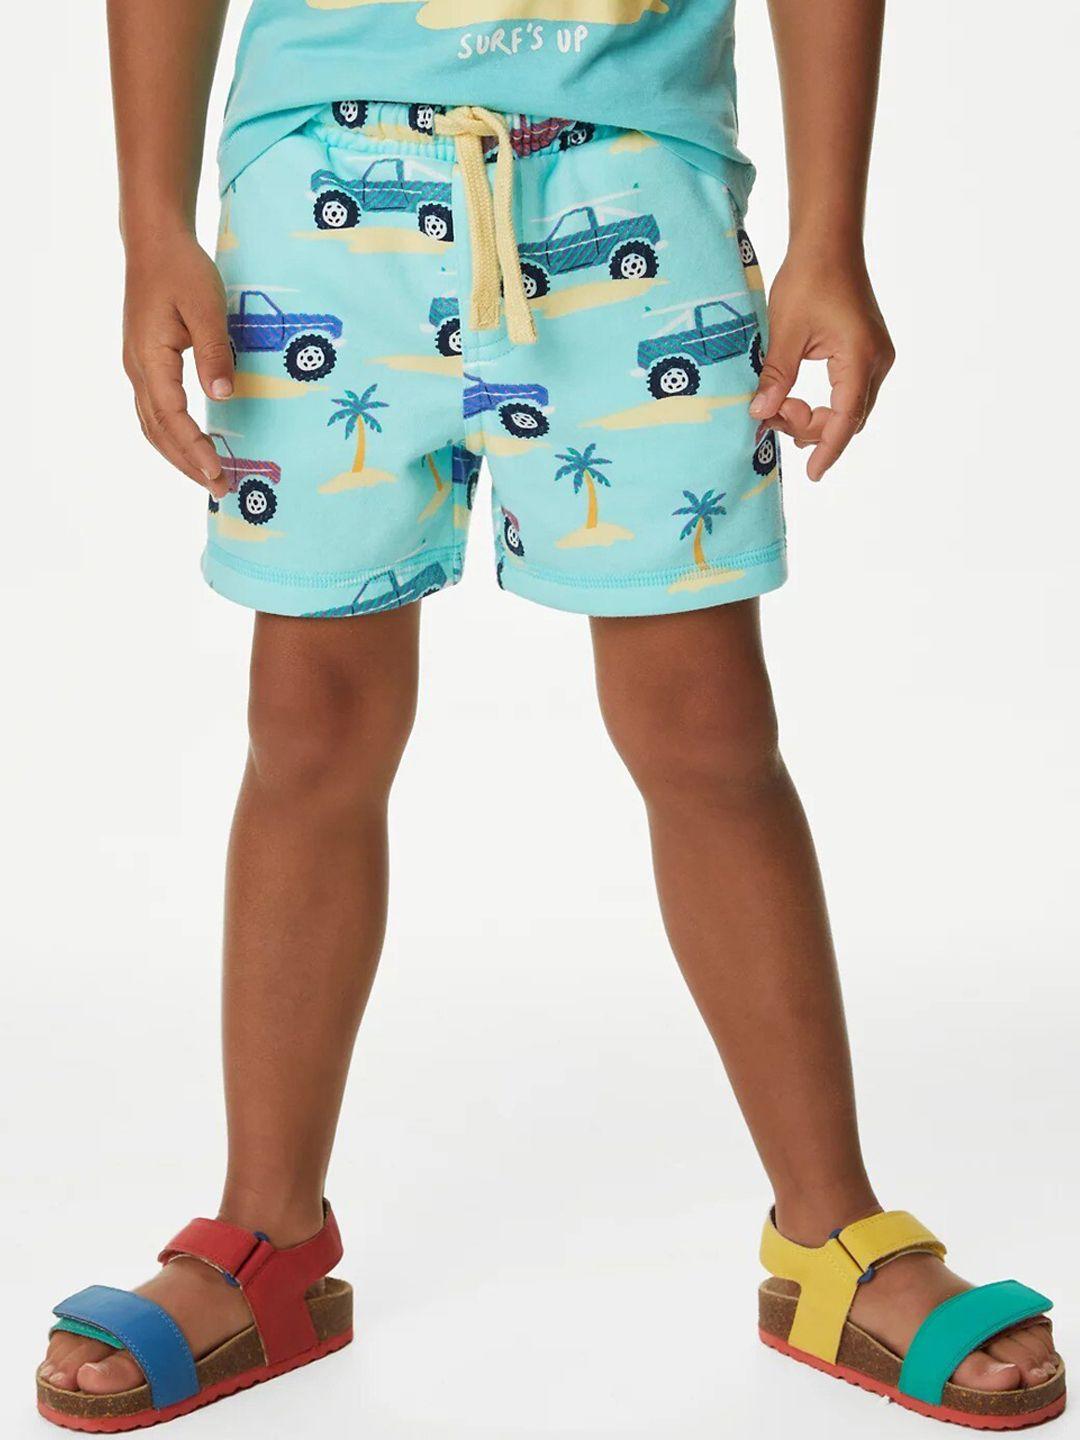 marks & spencer boys graphic printed shorts